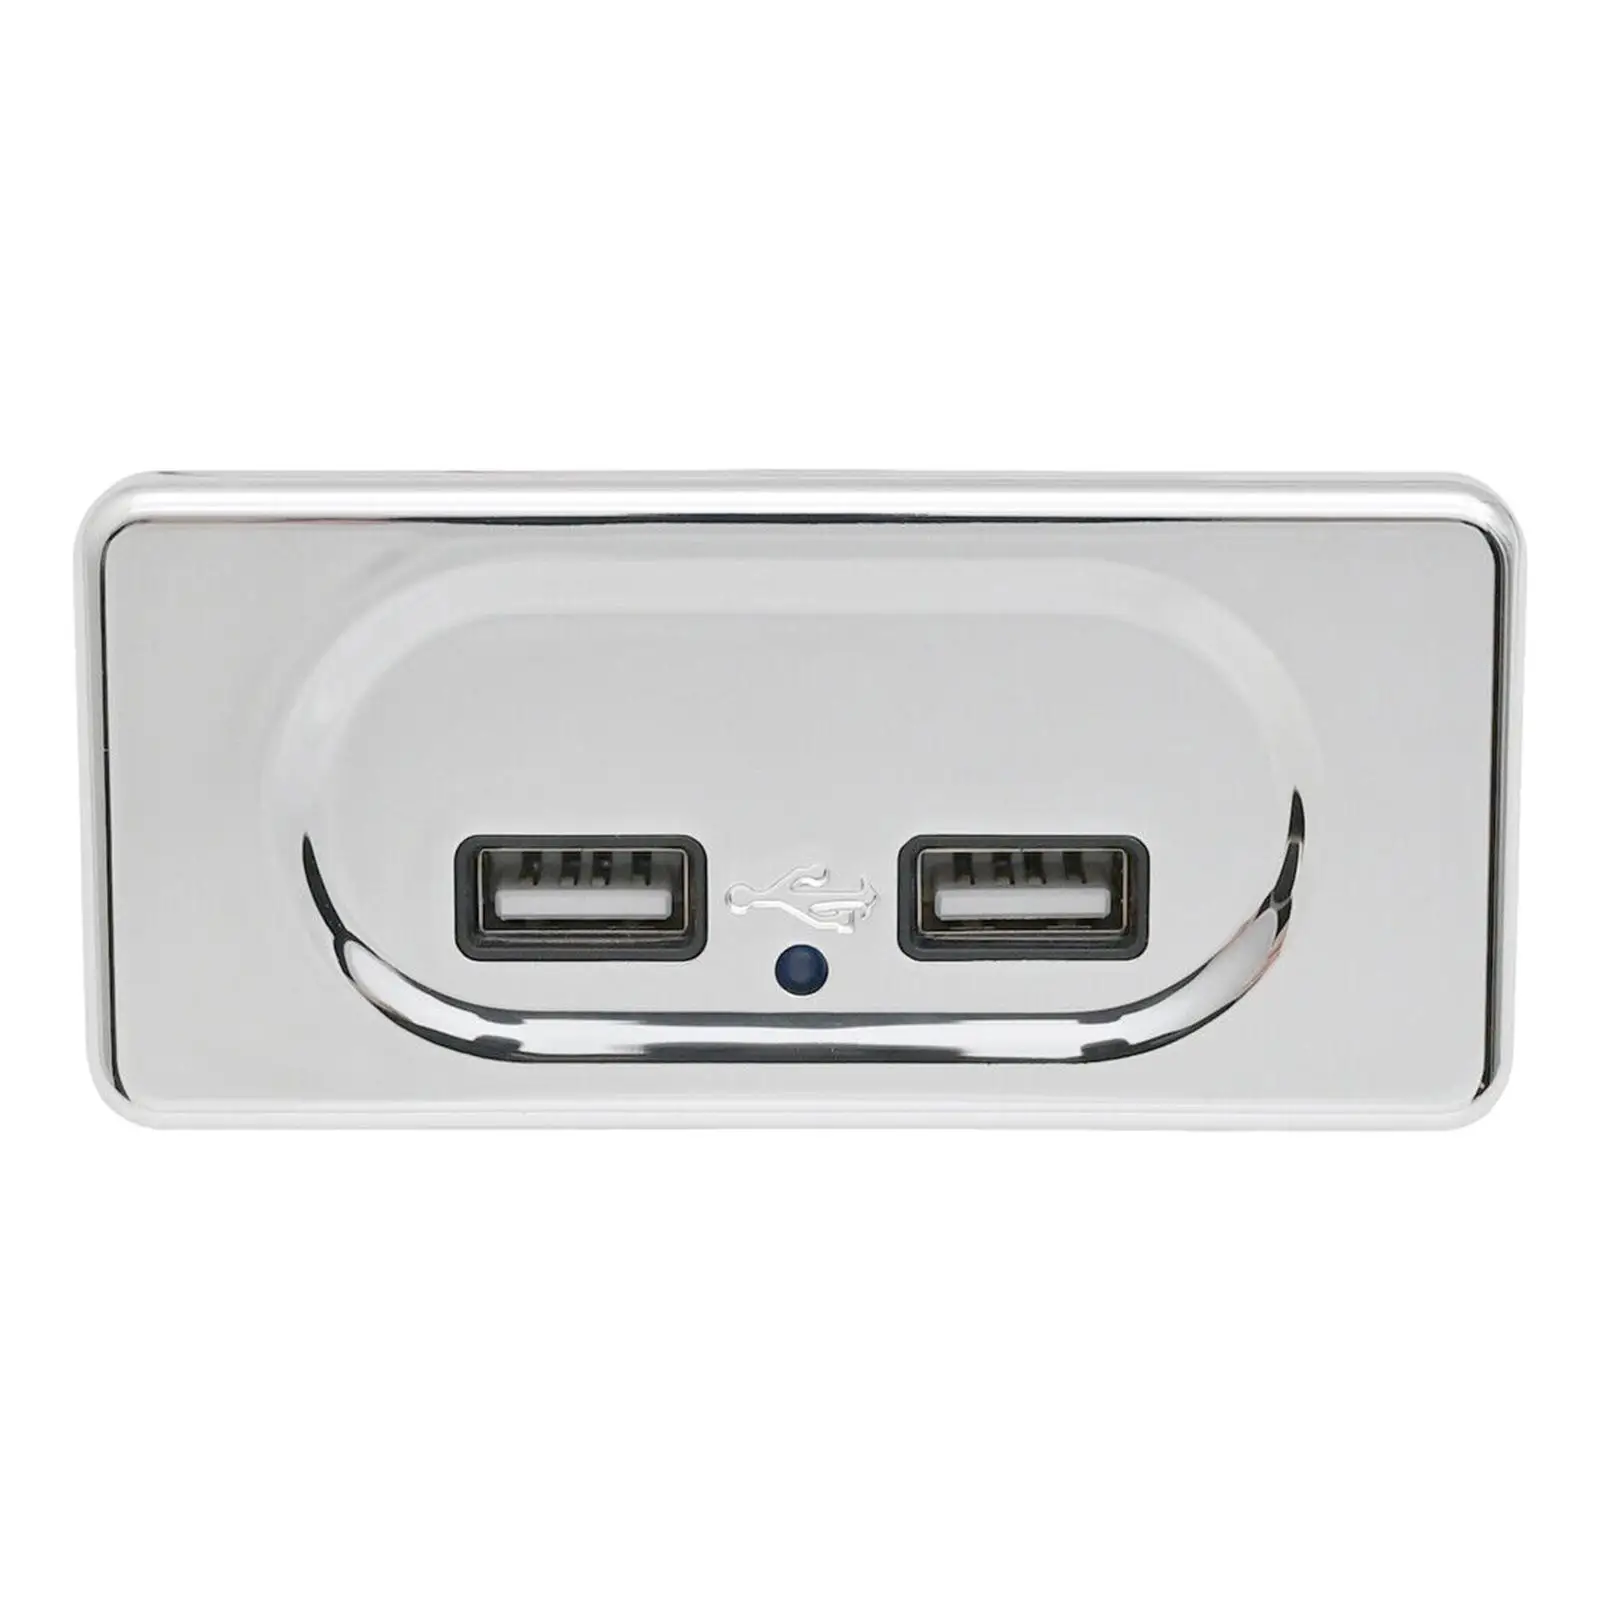 Dual USB Charger Socket Universal Power Adapter Outlet Panel USB Outlet Panel for Car RV Bus USB Devices Digital Camera